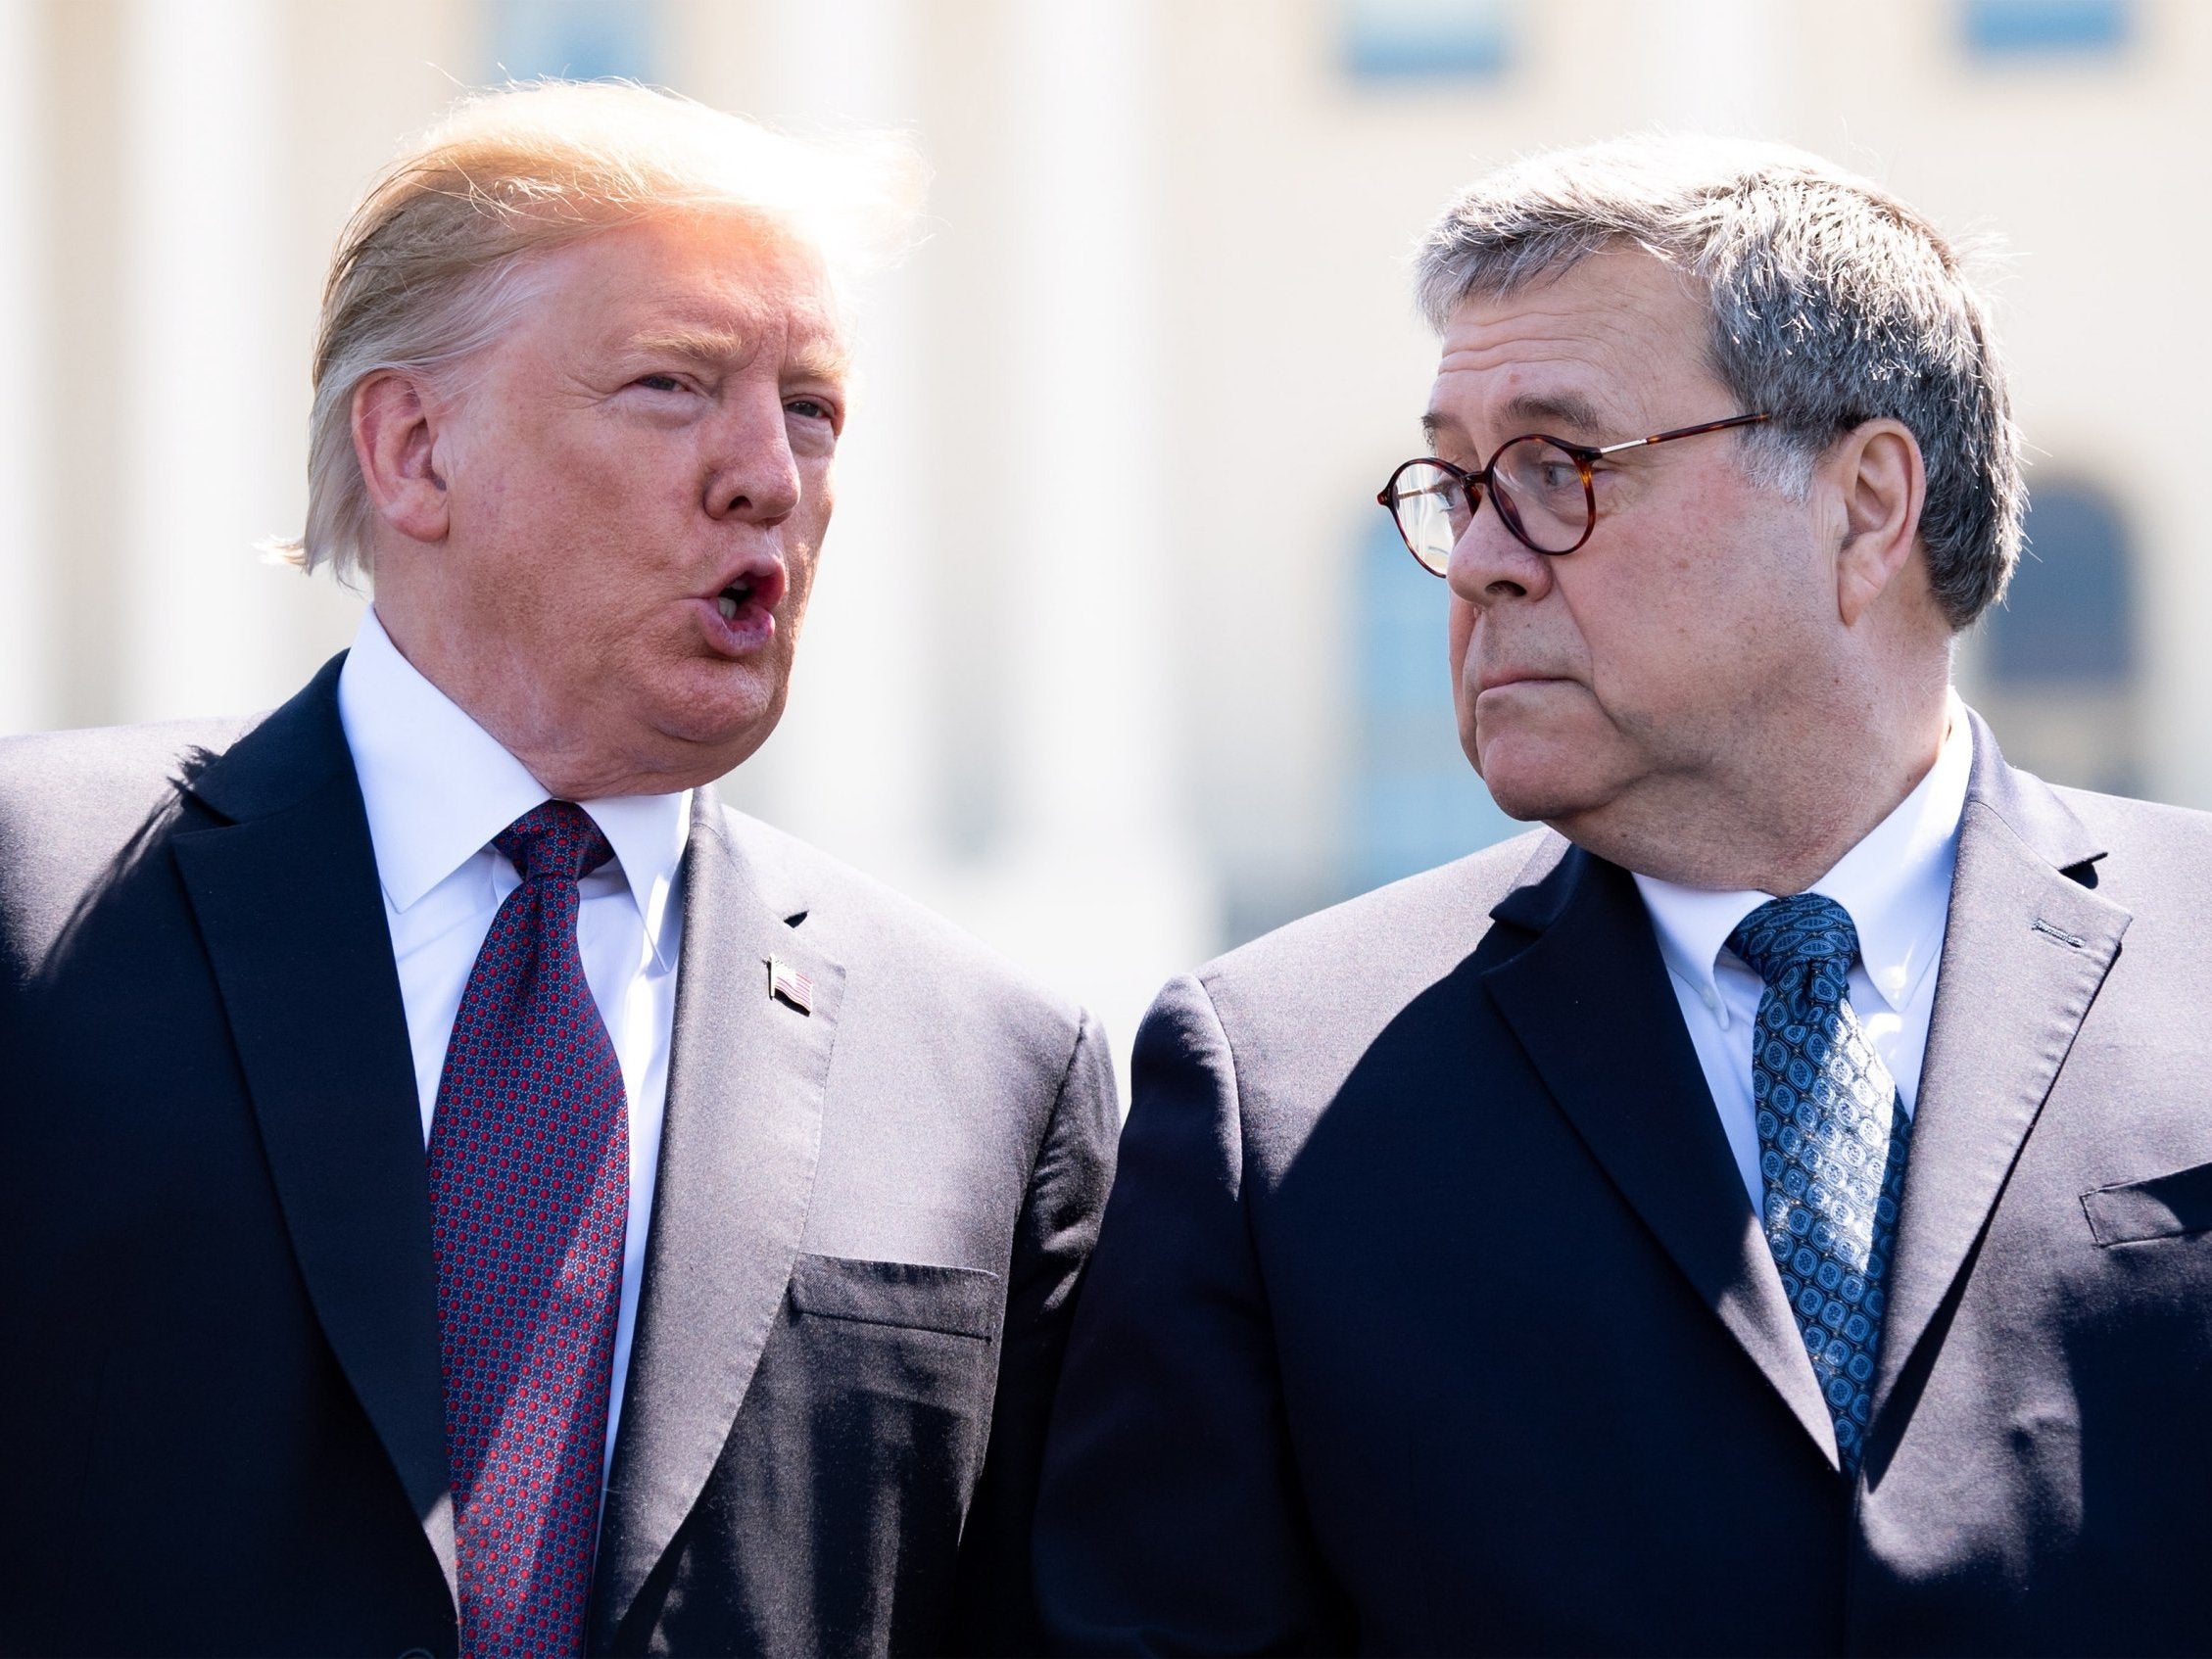 President Trump talks to attorney general William Barr during the 38th annual National Peace Officers' Memorial Service, at the US Capitol in Washington, DC, on 15 May 2019